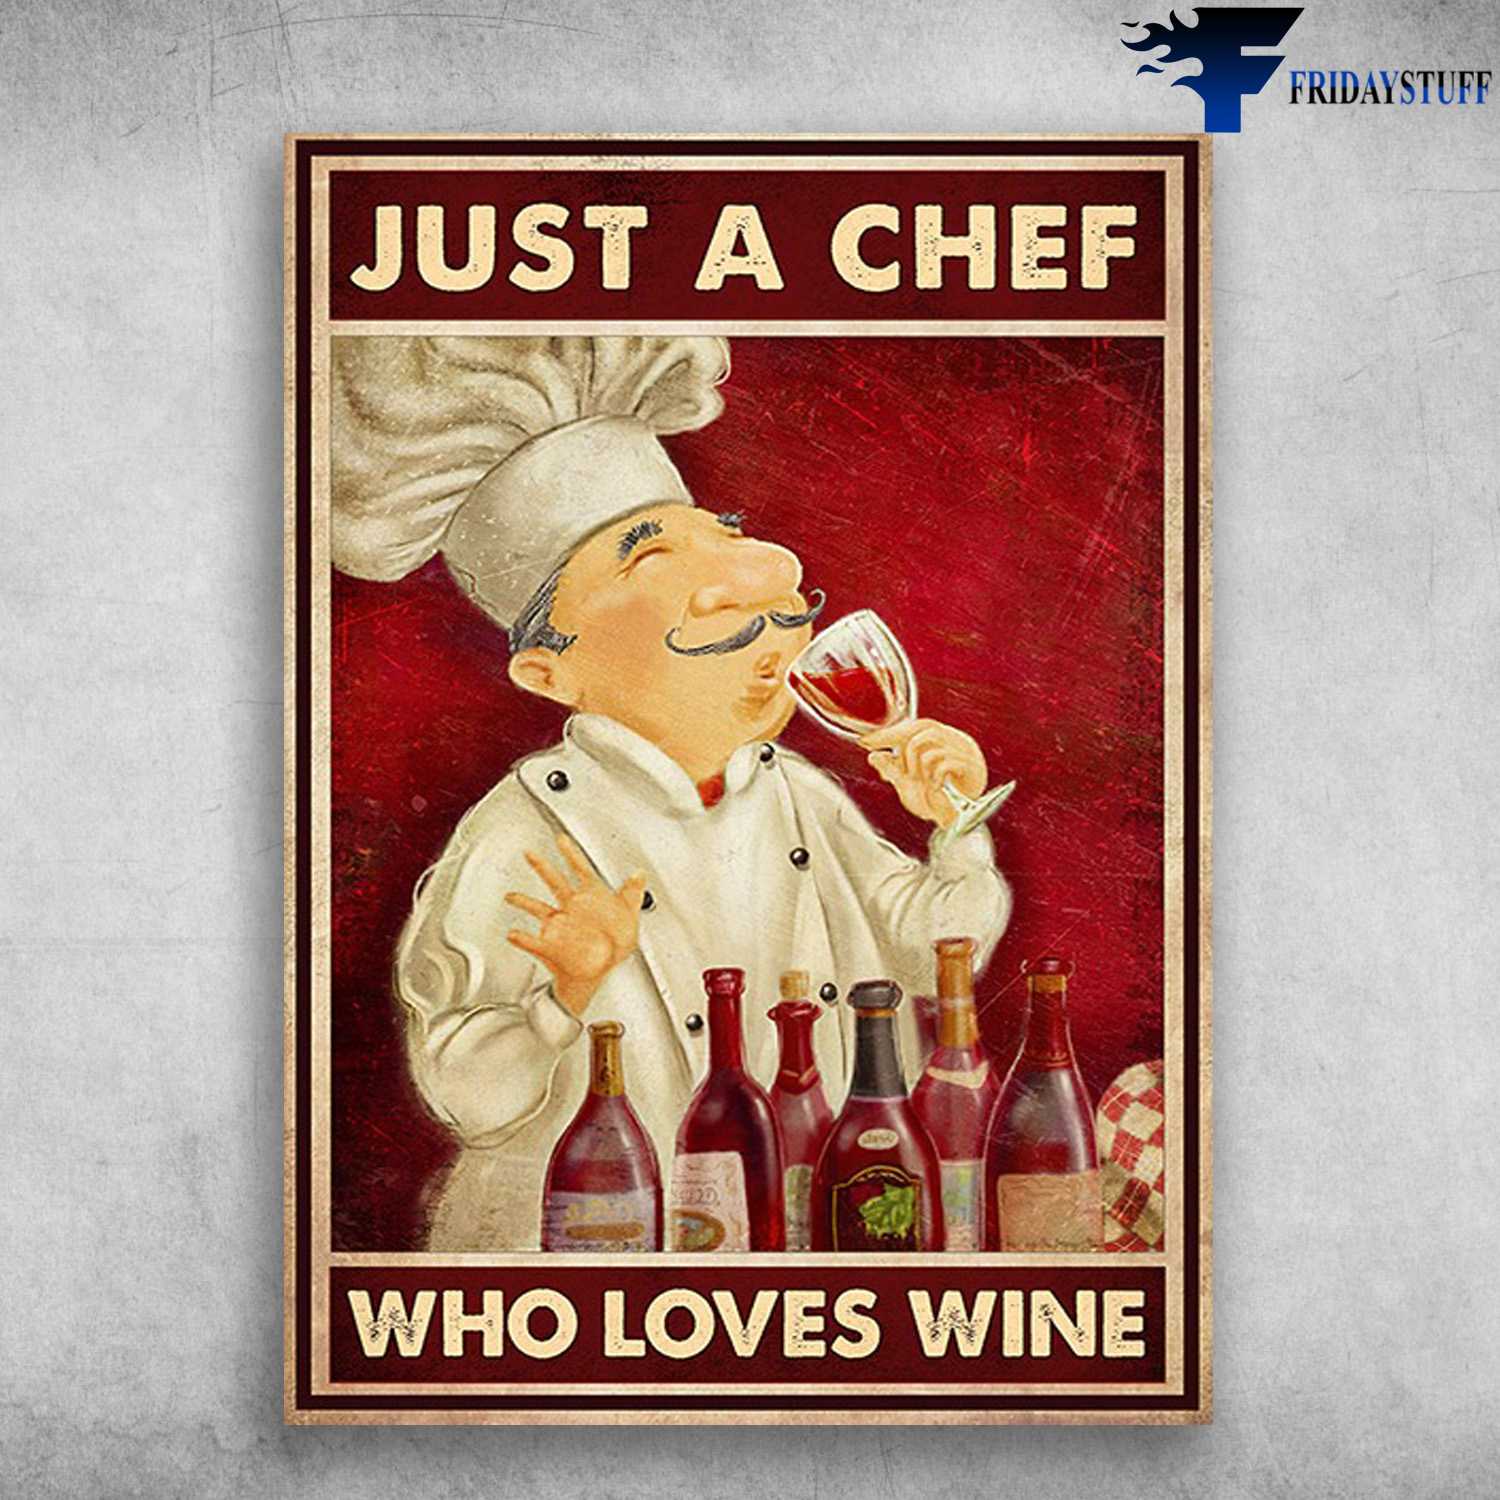 Drinking Chef, Chef Loves Wine - Just A Chef, Who Loves Wine